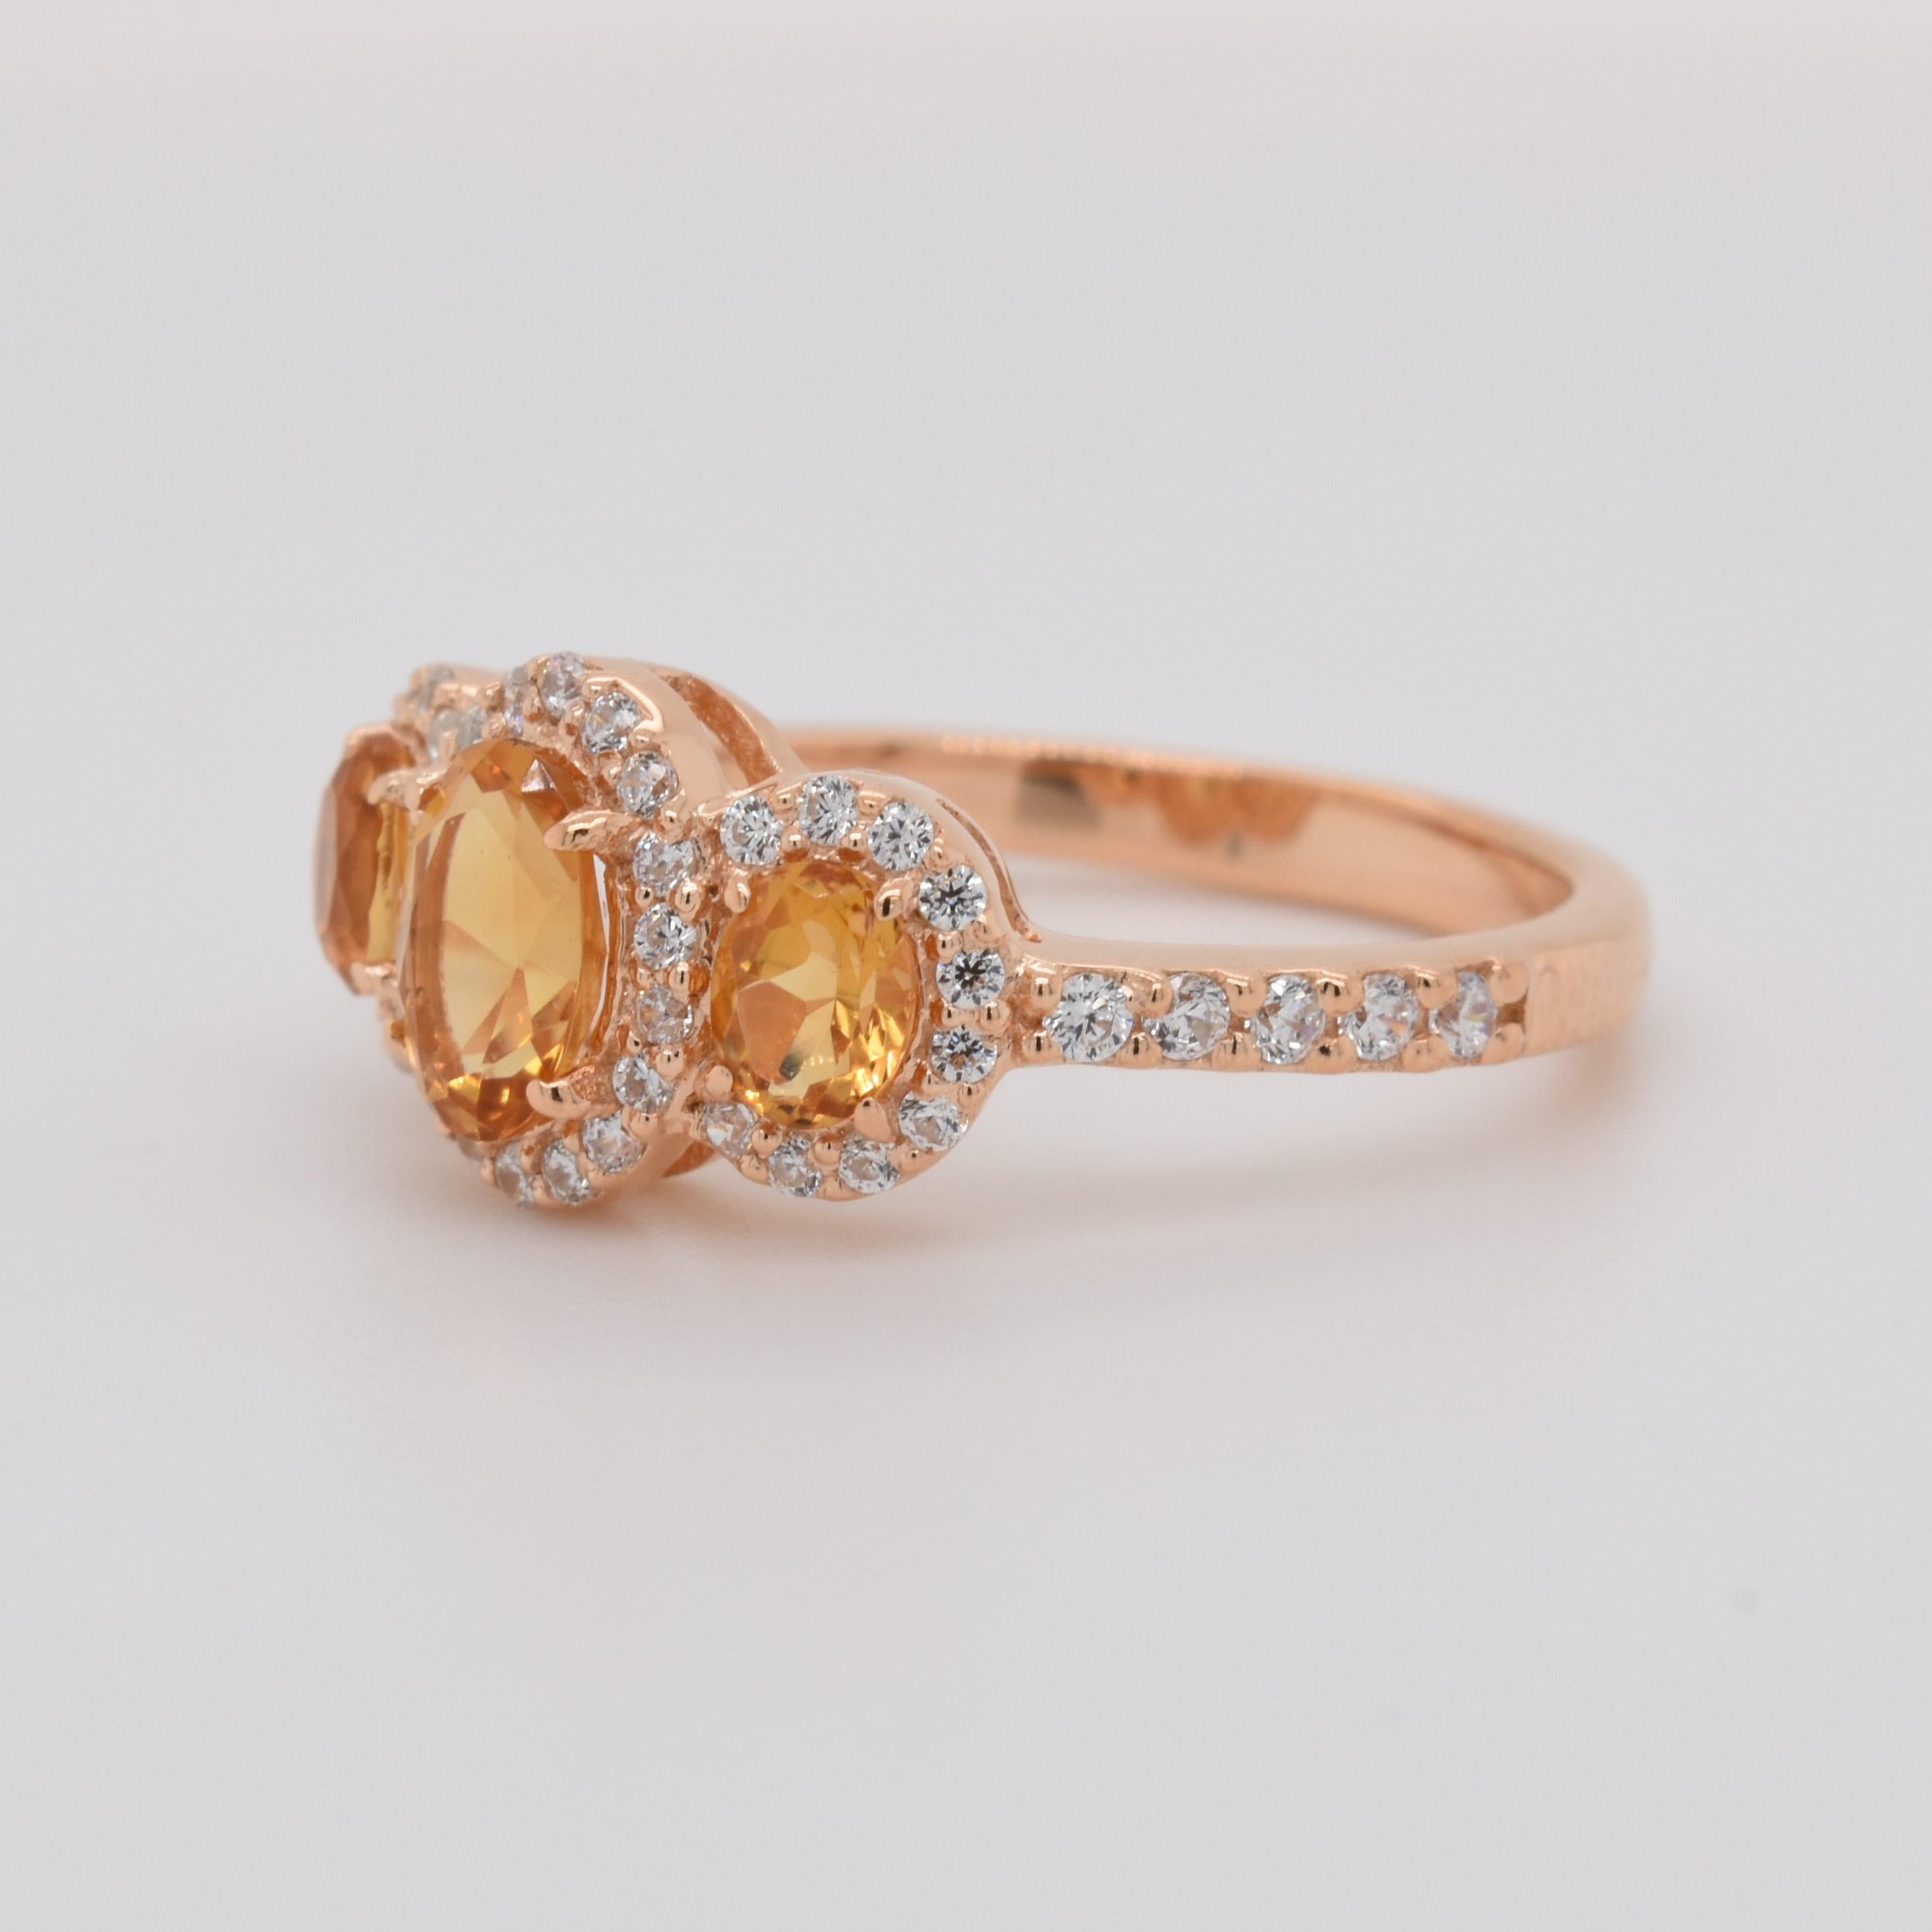 Oval Shape Citrine Gemstone And CZ beautifully crafted in a Ring. A fiery Yellow Color November Birthstone. For a special occasion like Engagement or Proposal or may be as a gift for a special person.

Primary Stone Name - Citrine
Primary Stone